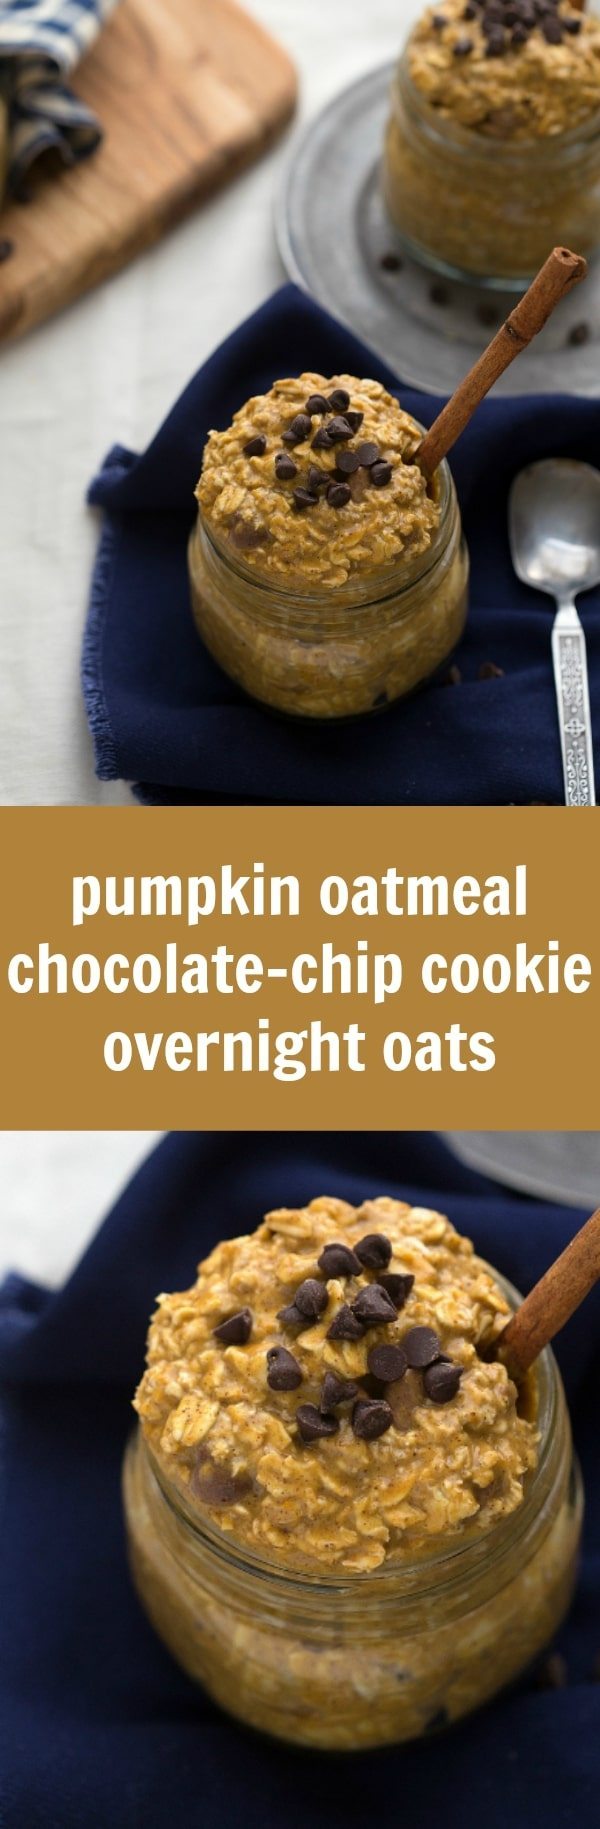 One commenter said These are the best overnight oats I’ve ever had. I shared this recipe with my sister and she loved them too. Thank you for a great pumpkin breakfast!